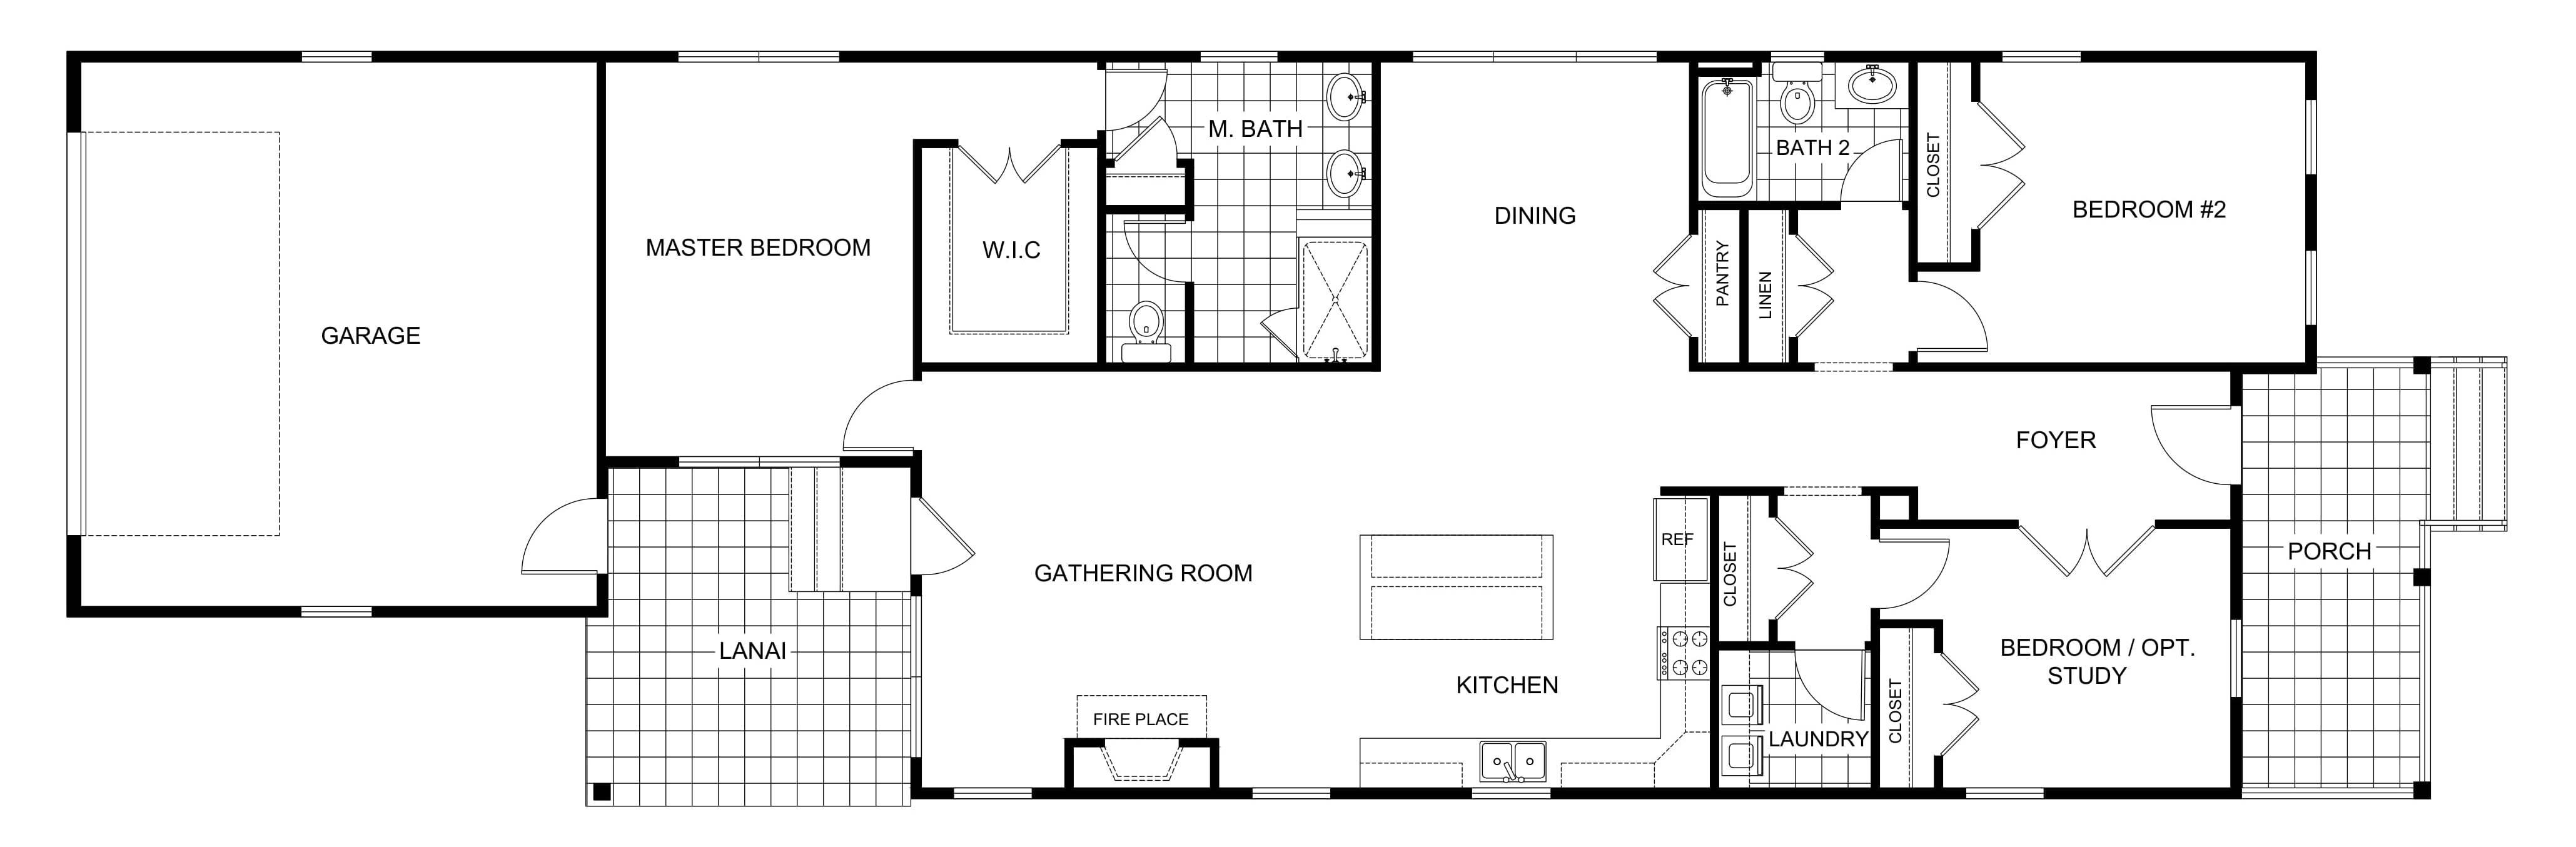 Professional Floor Plans at Unbeatable Lowest Price The